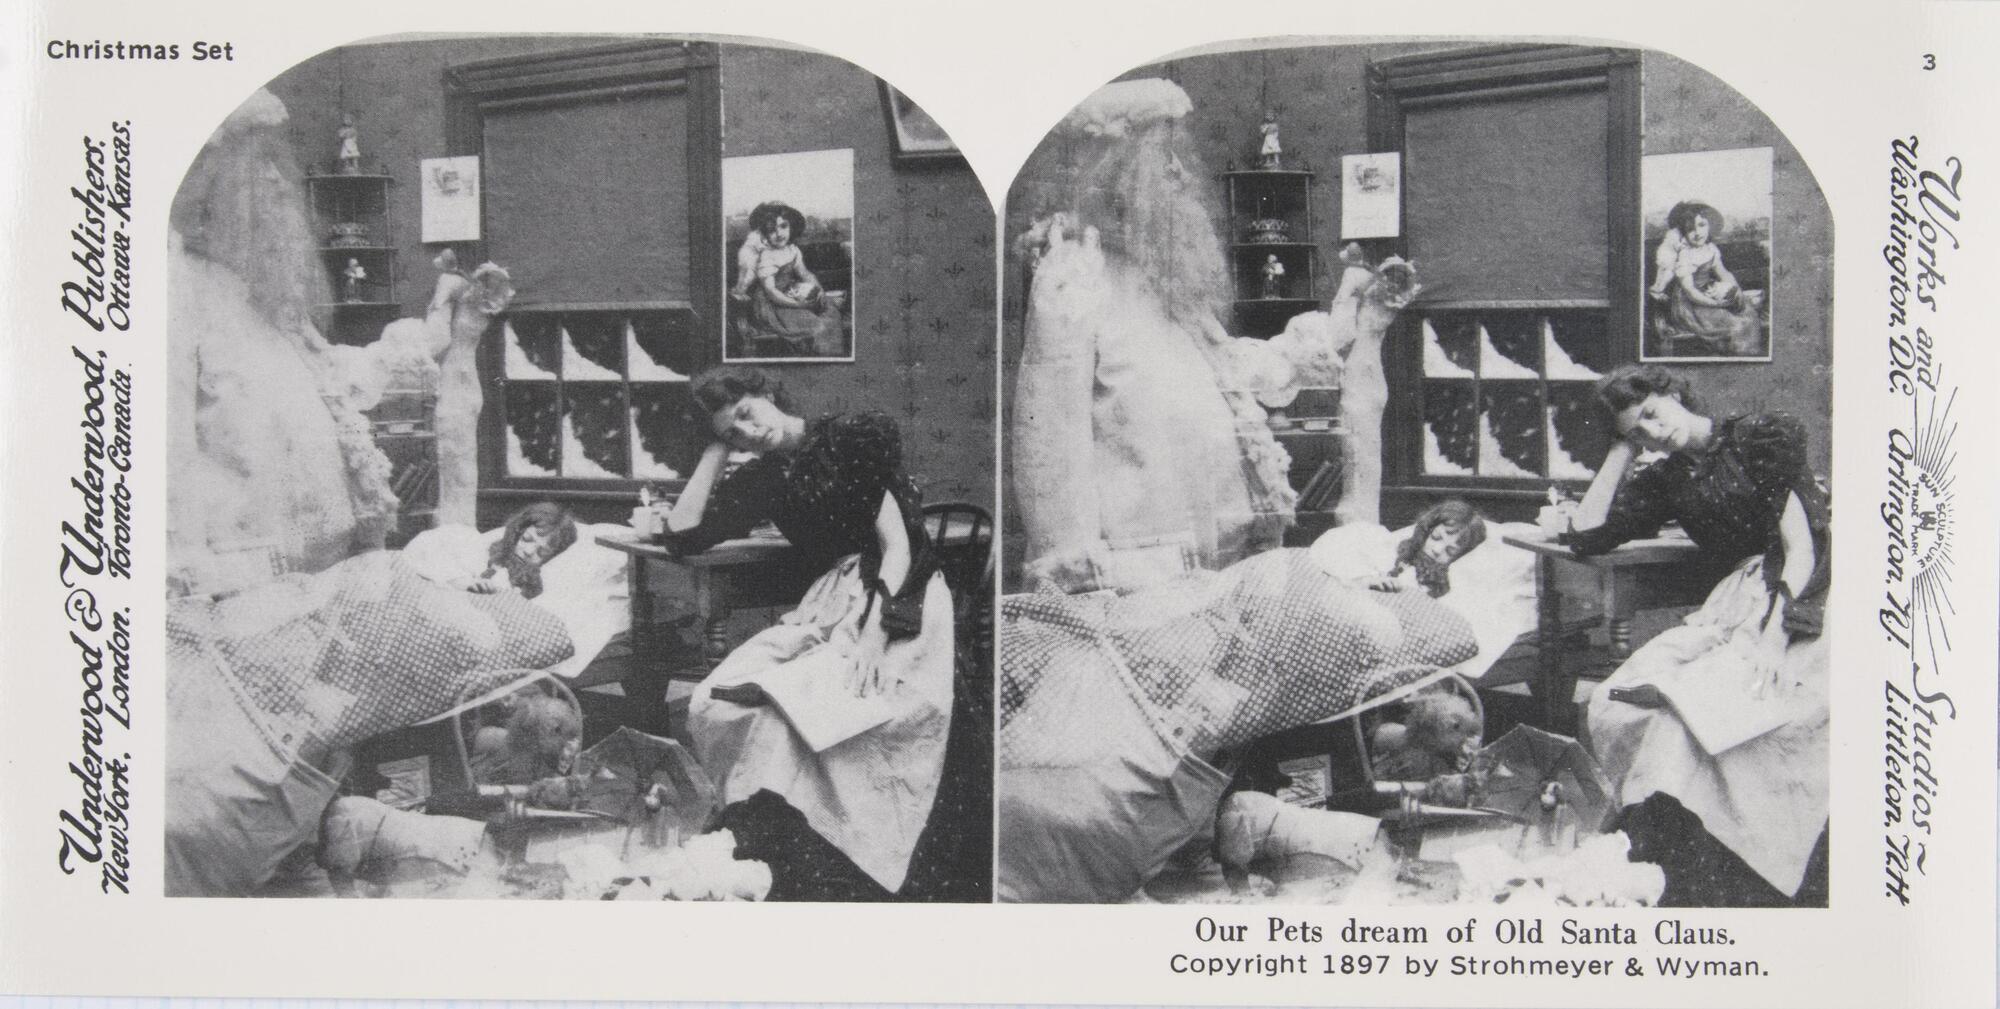 This black and white stereoscopic image features two images of a little girl sleeping in a bed by a snow-covered window.  Sleeping next to her is a seated woman and to her left is Santa.  It is surrounded by the text: Christmas Set; Underwood &amp; Underwood, Publishers; Our Pets dream of Old Santa Claus, copyright 1897 by Strohmeyer &amp; Wyman.<br />